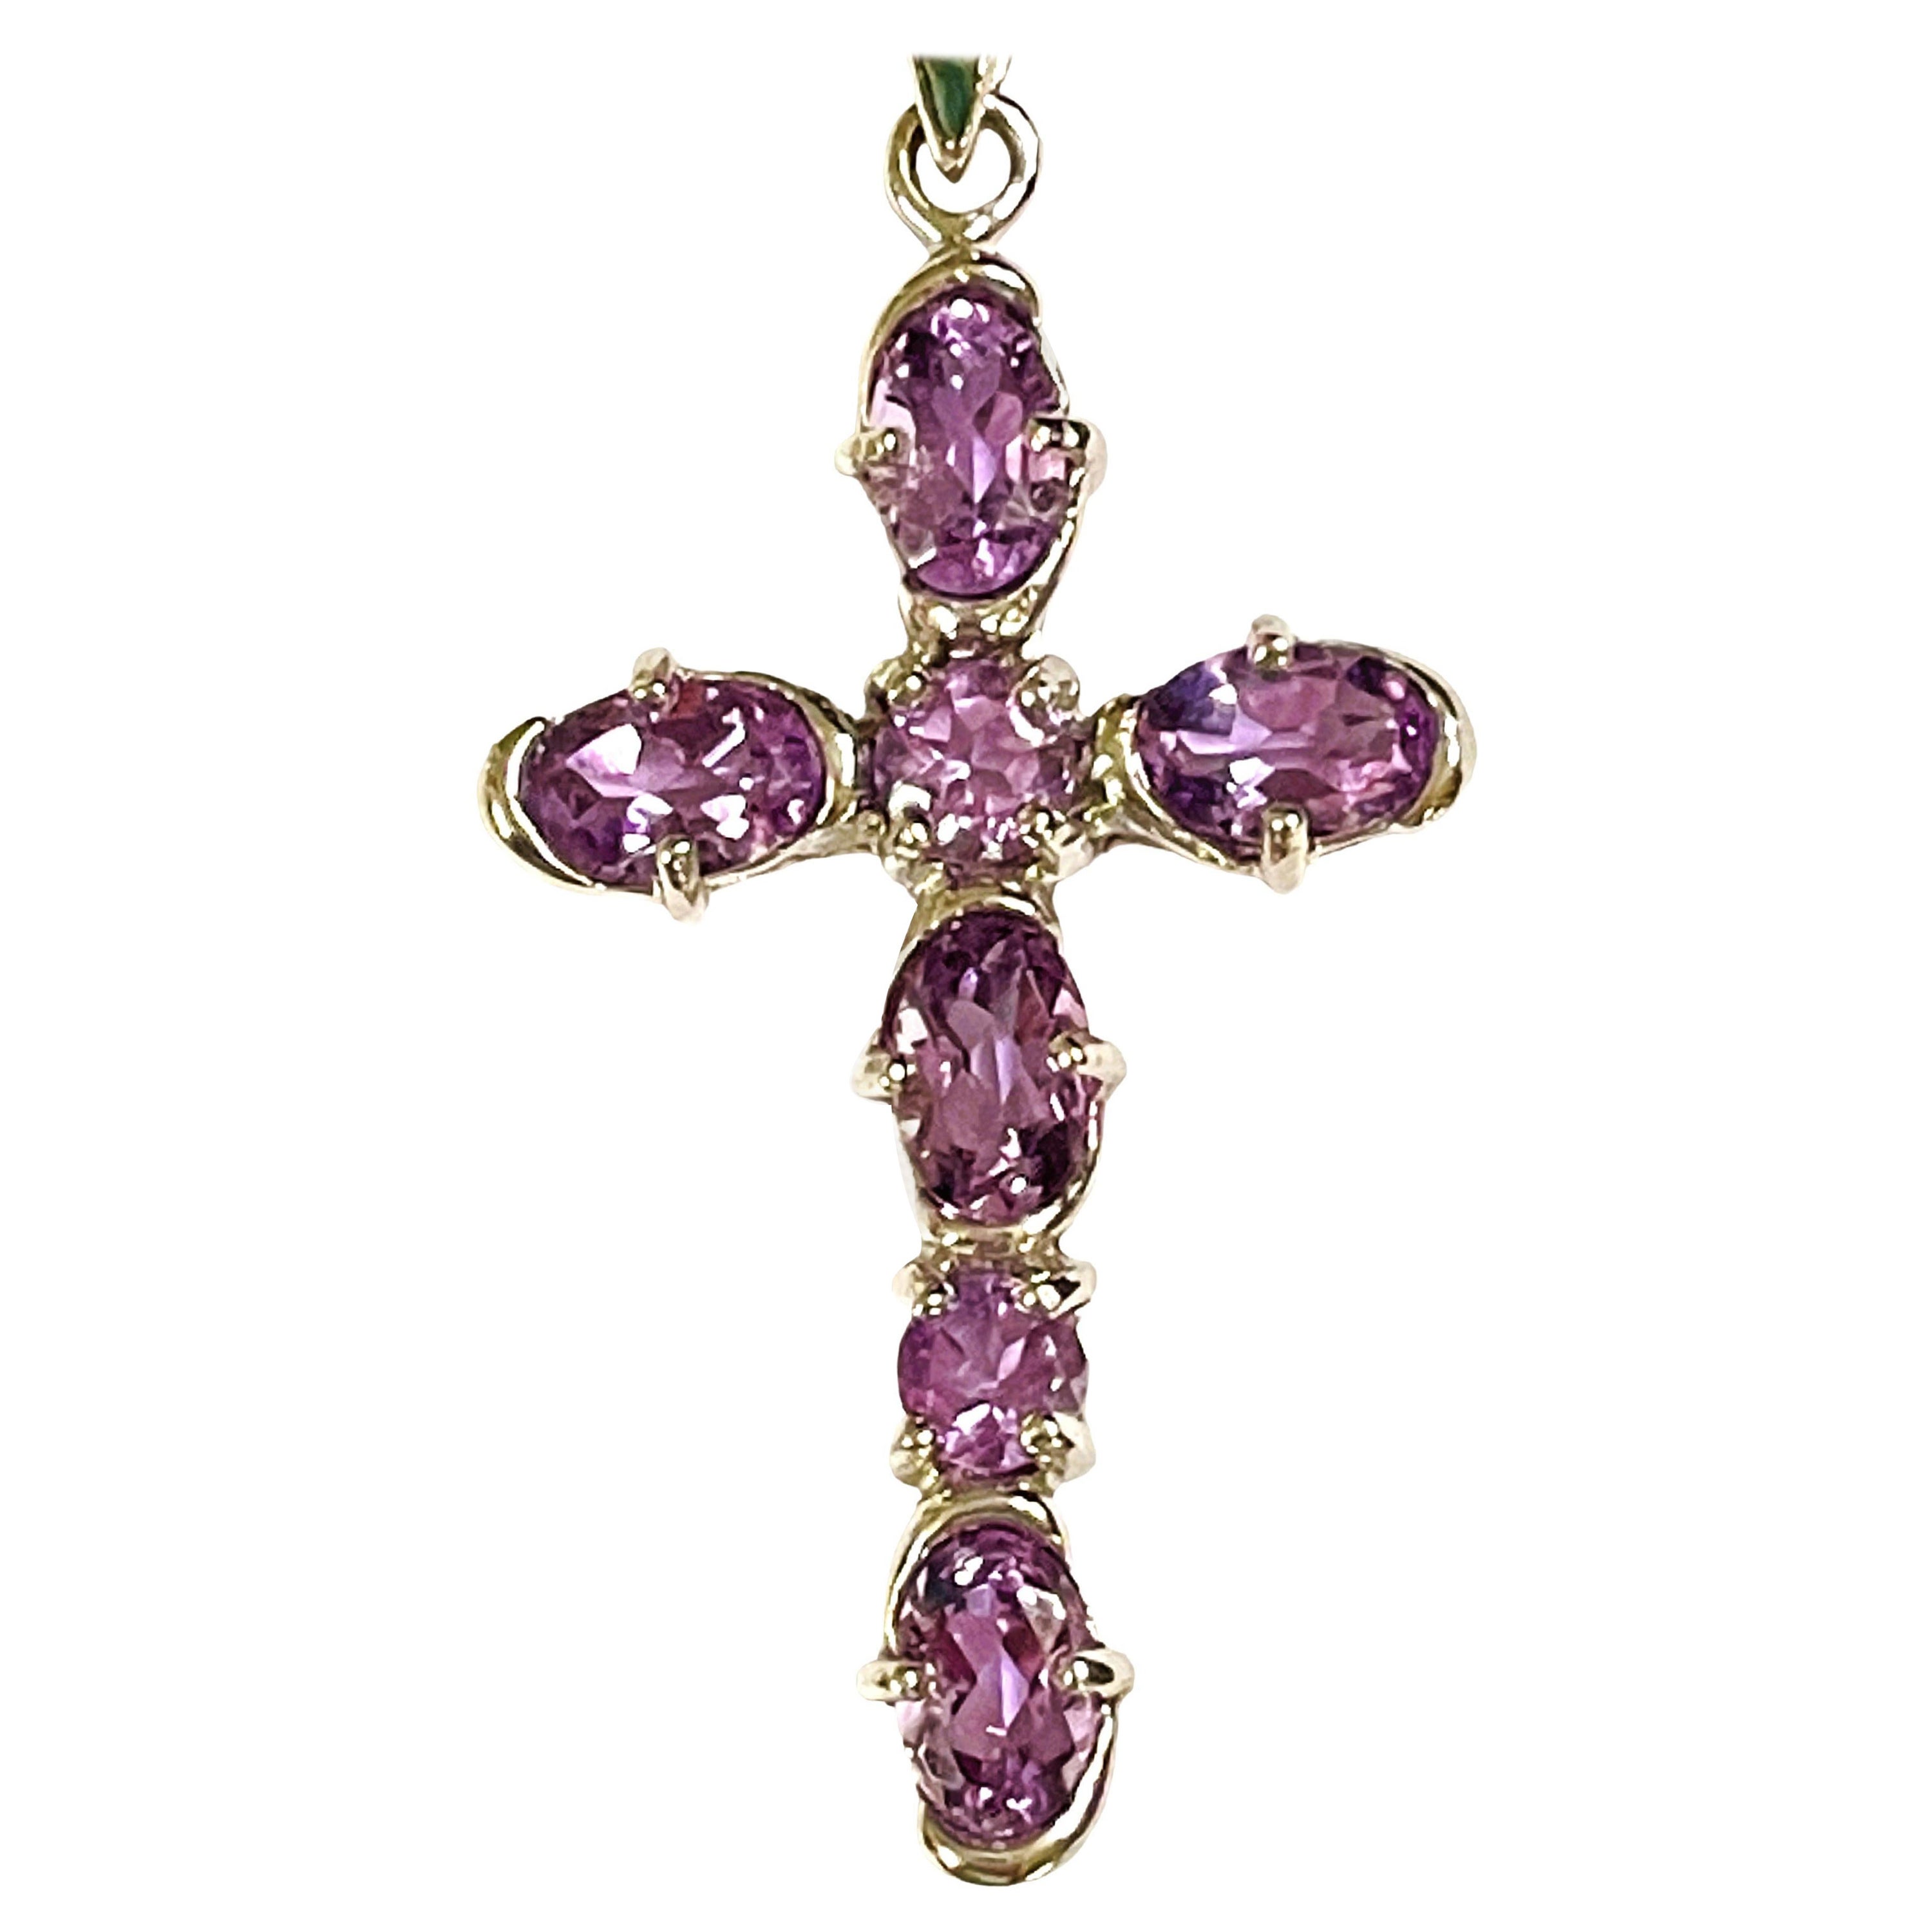 New Amethyst Sterling Silver Cross Necklace with Adjustable Chain For Sale